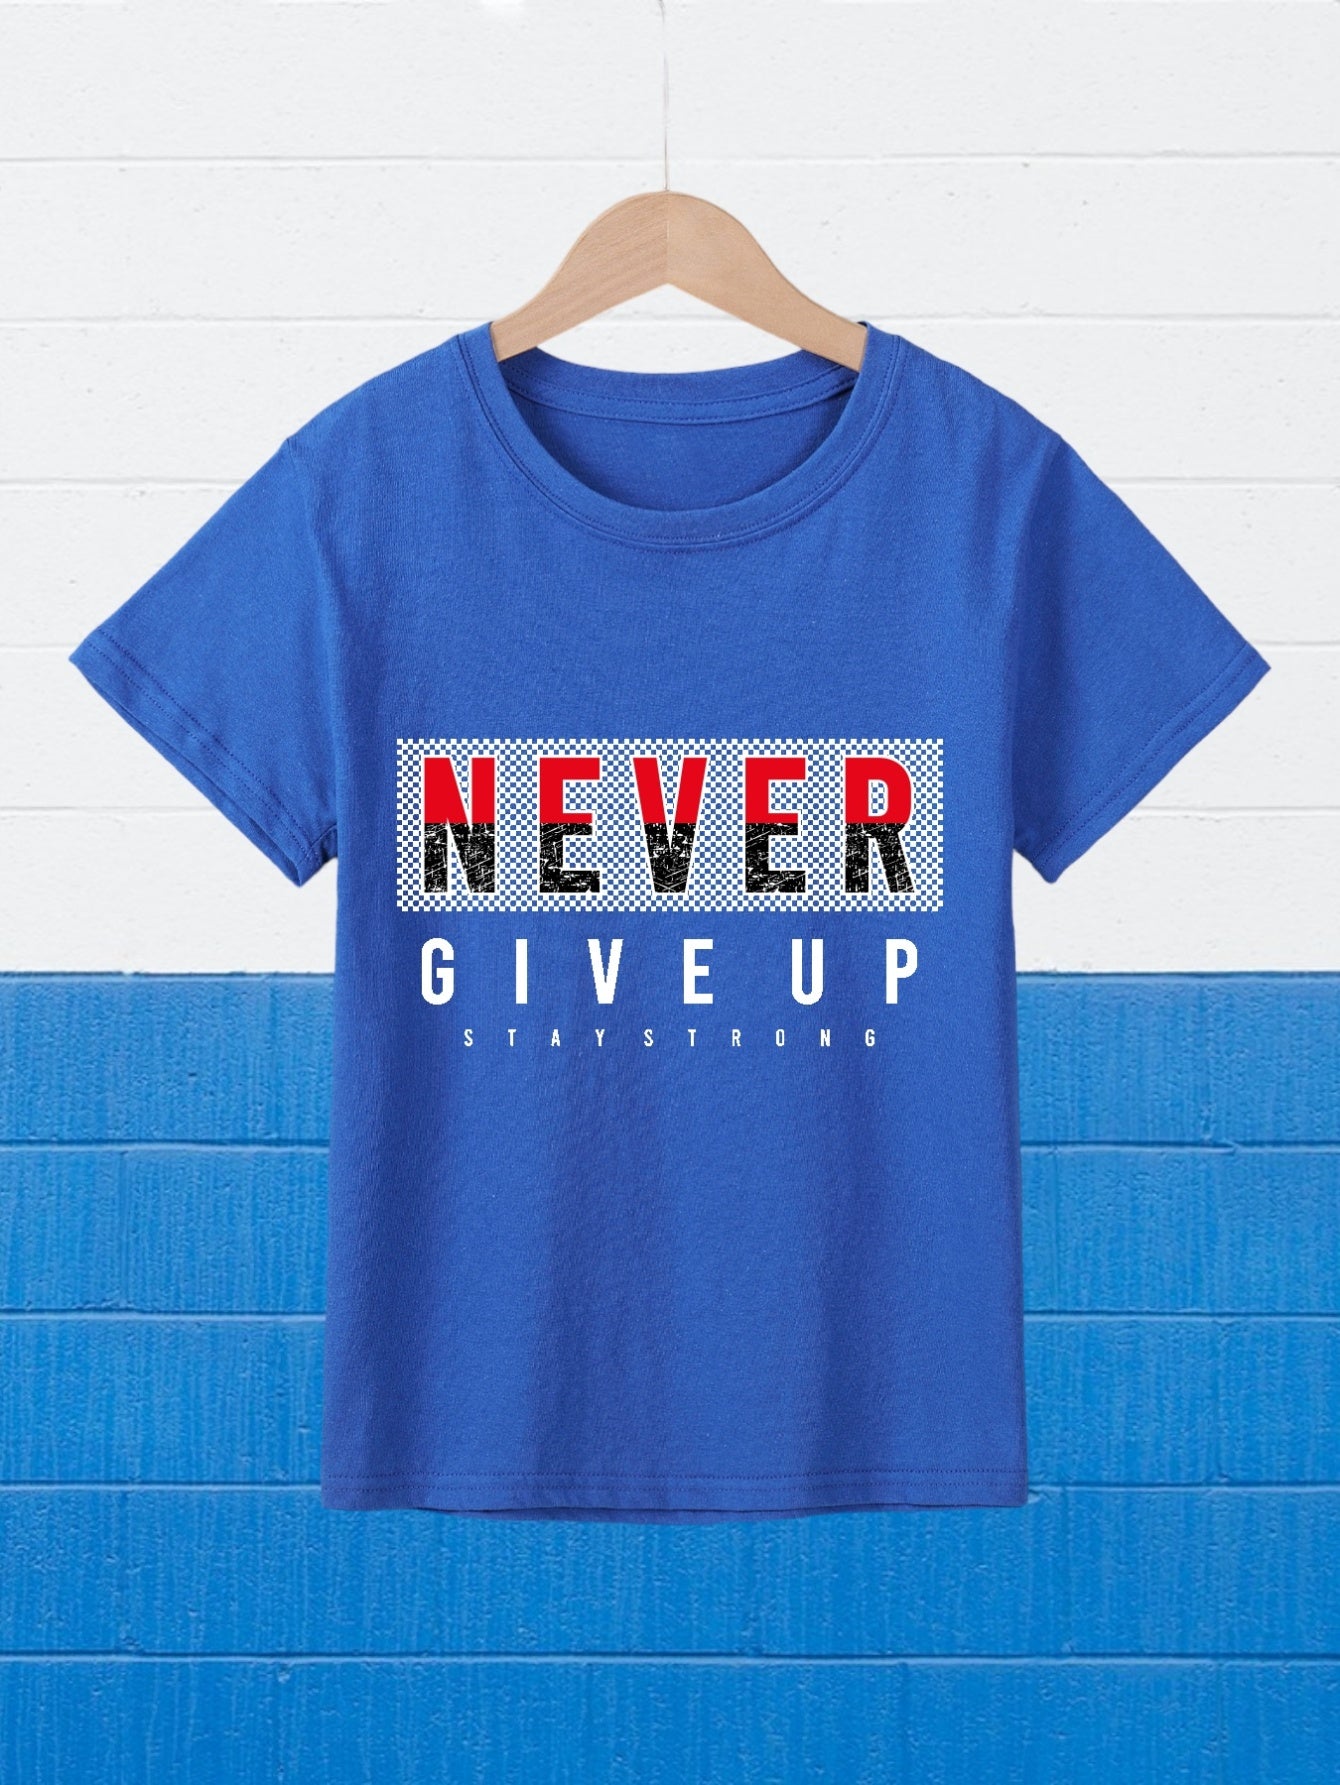 NEVER GIVE UP Youth Christian T-shirt claimedbygoddesigns